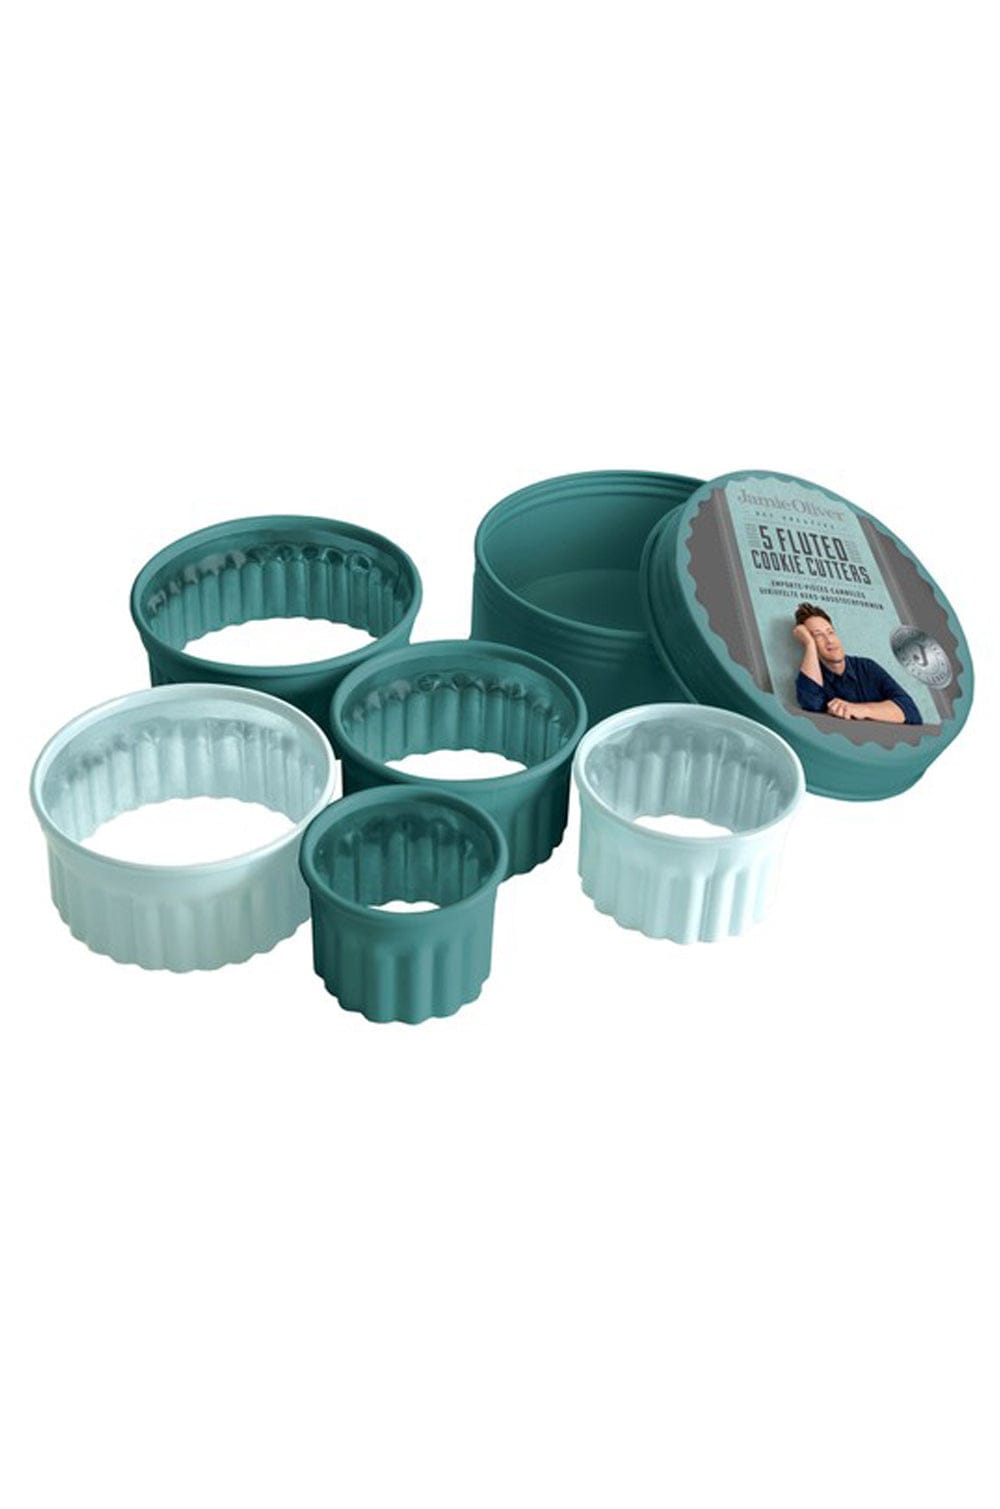 Jamie Oliver Fluted Cookie Cutters- Set of 5 - Atlantic Green